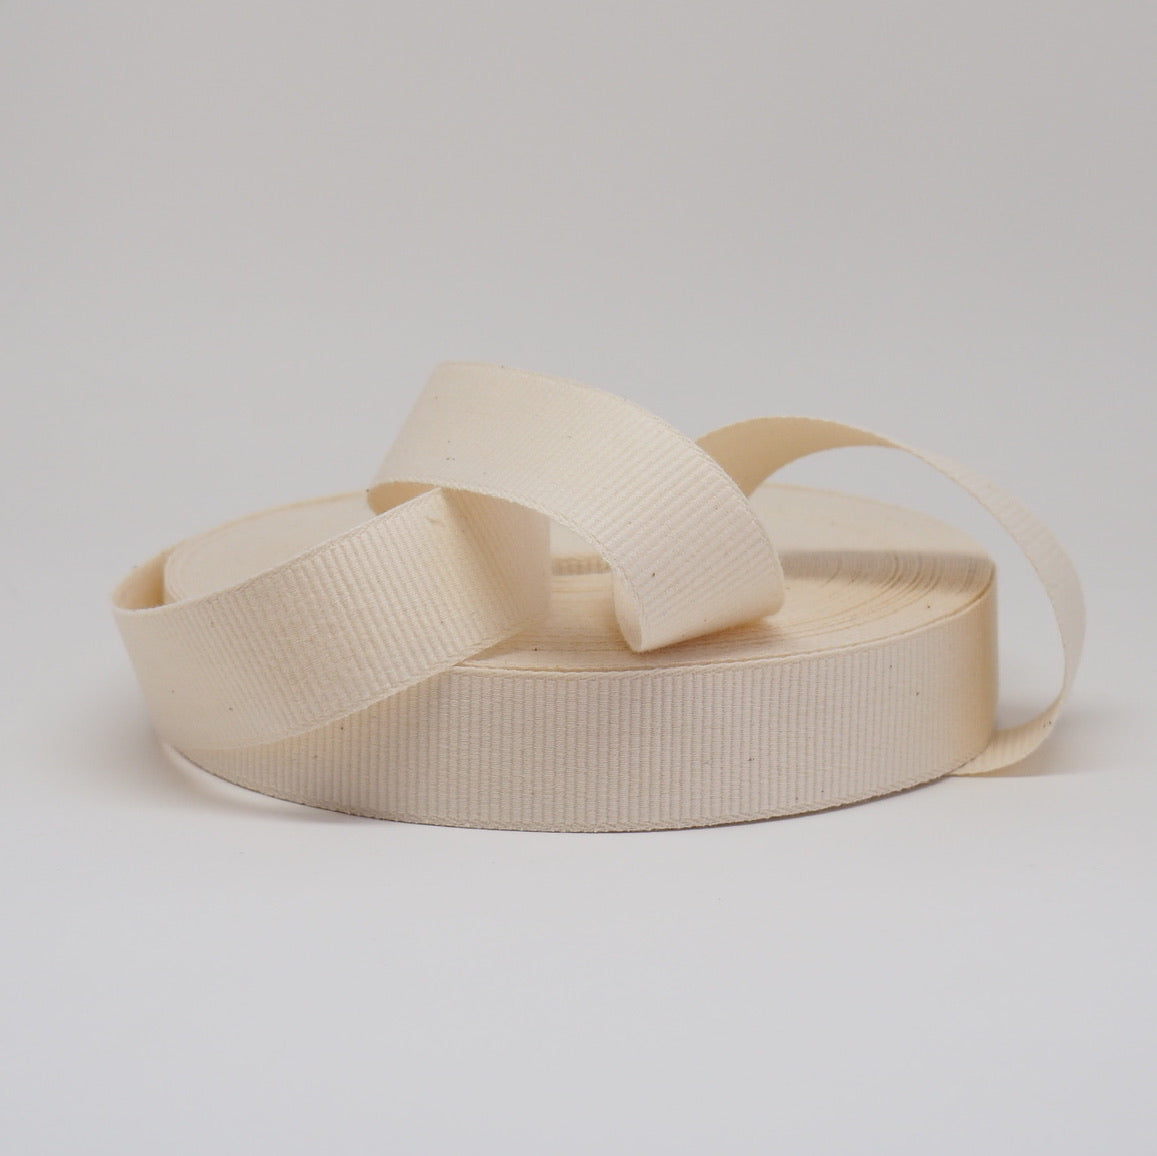 ORGANIC COTTON NARROW WEAVE RIBBON  - NATURAL in 10, 15 and 25mm